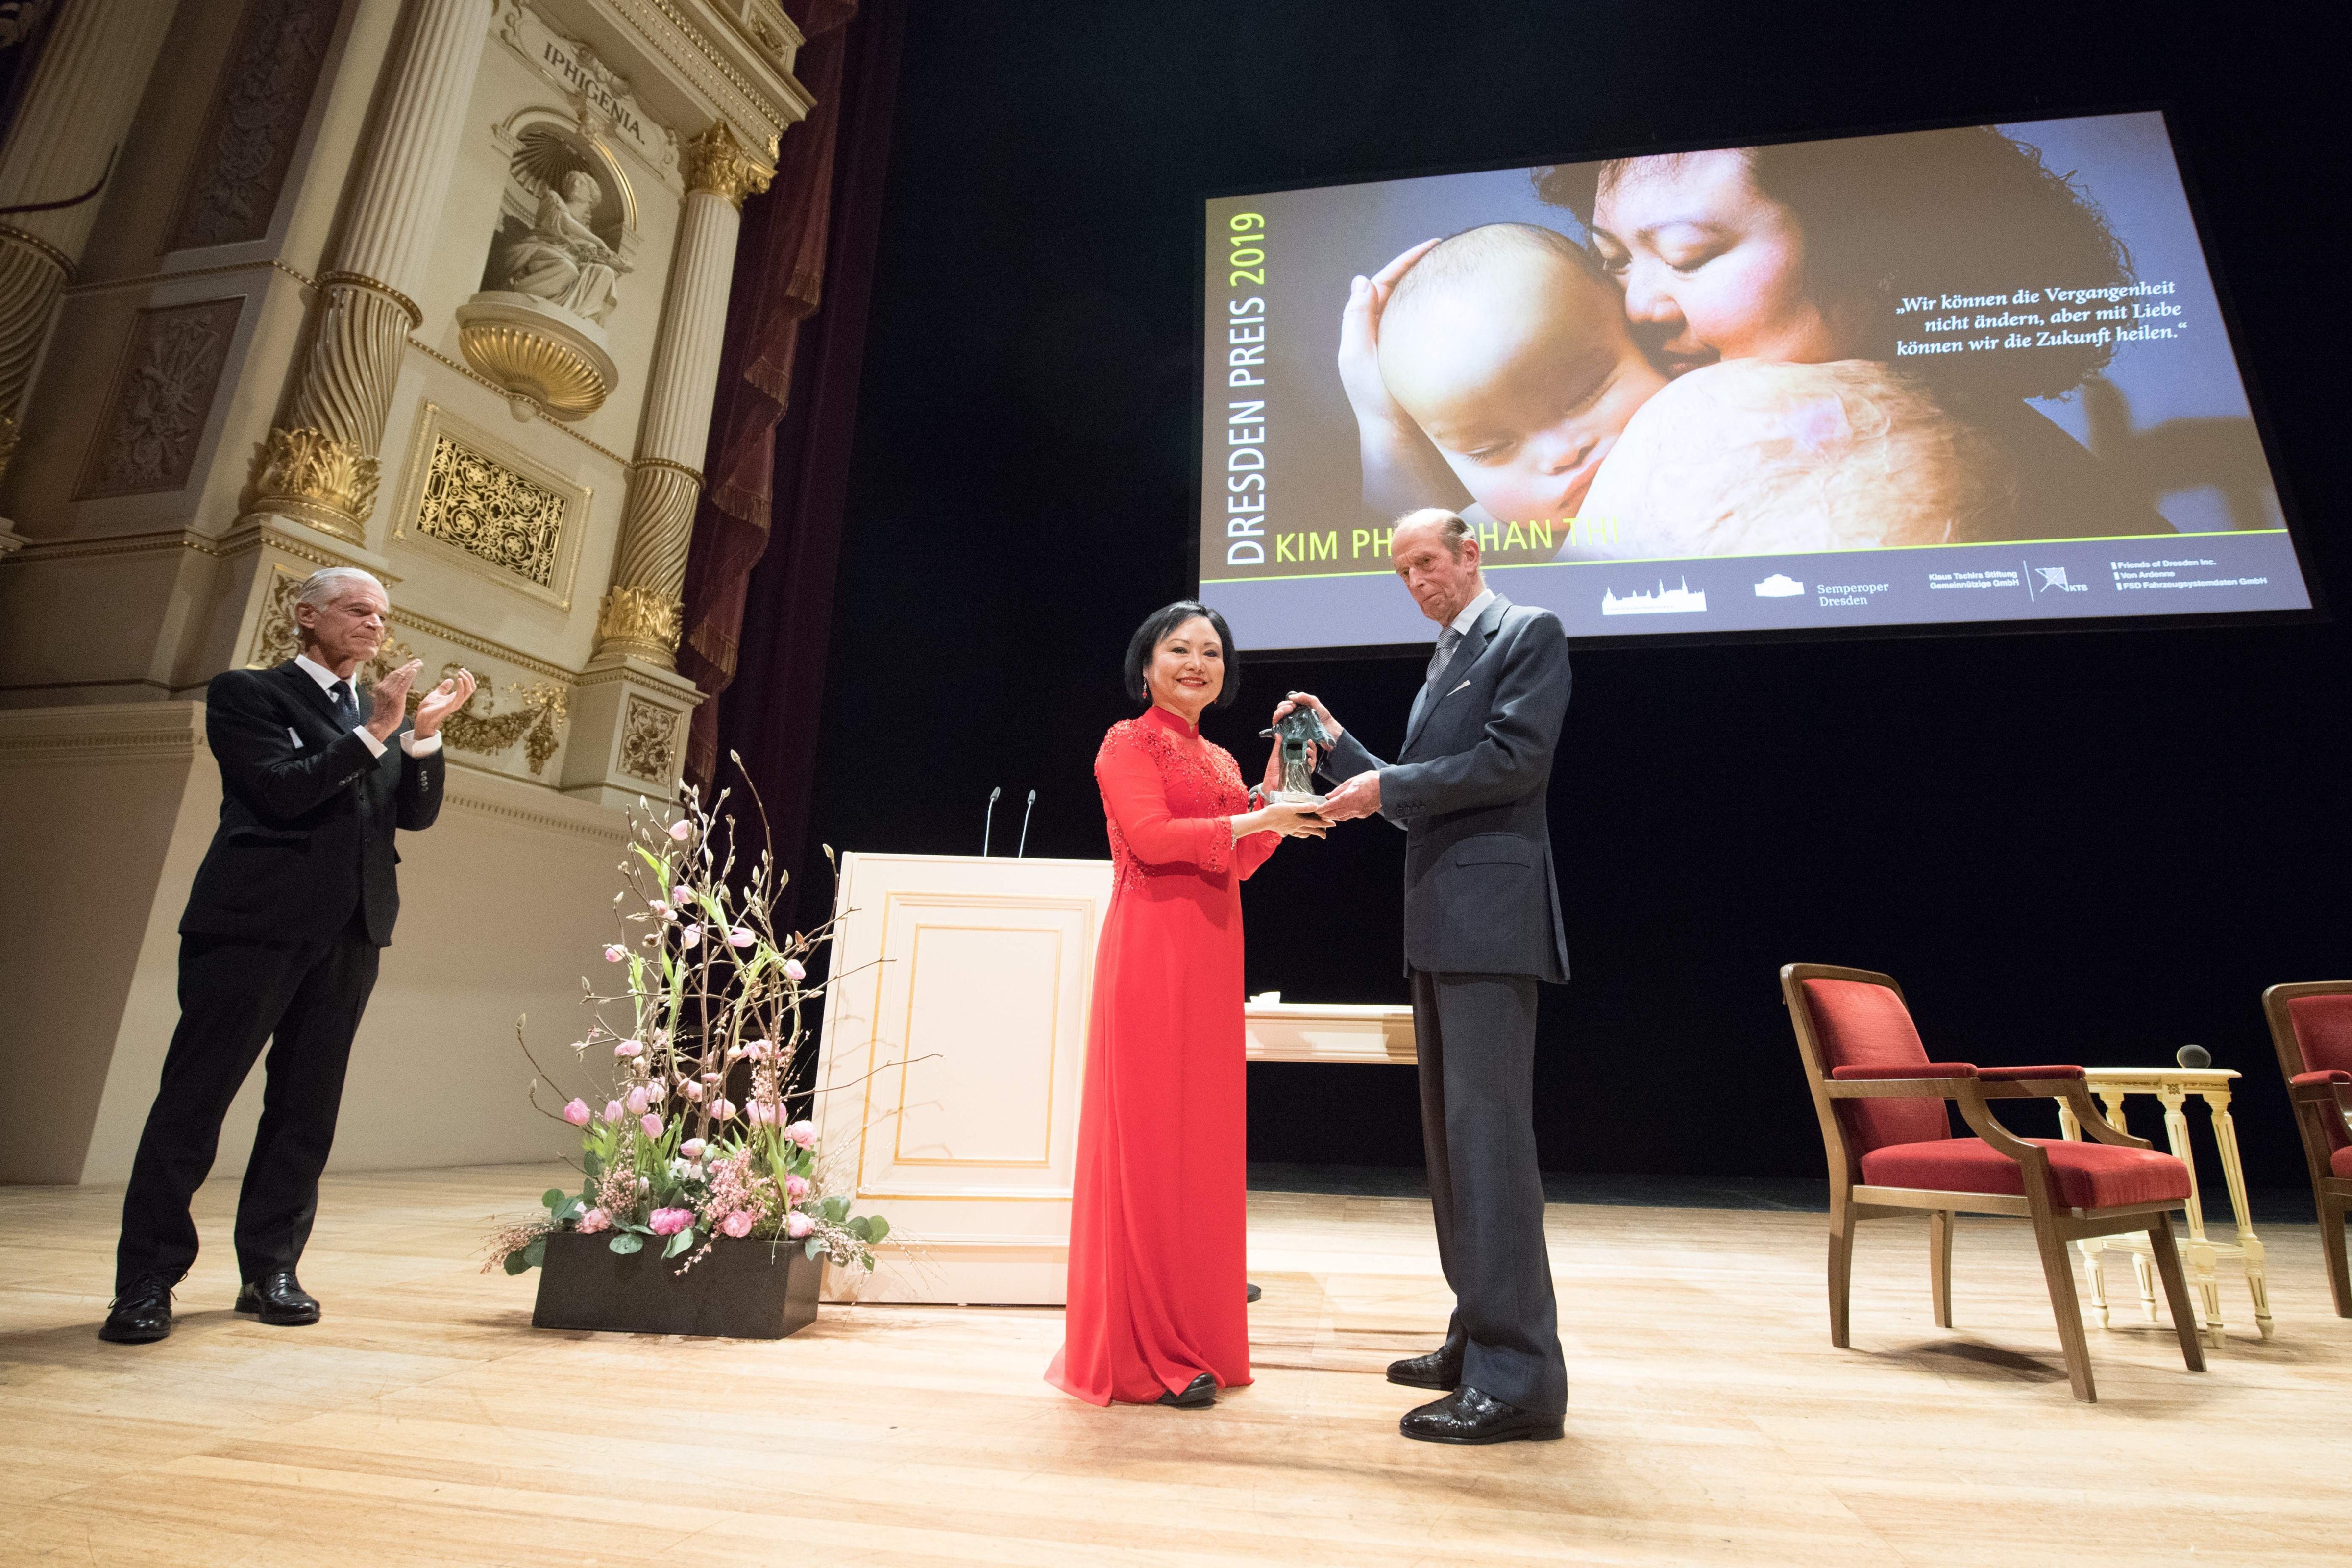 Kim Phuc Phan Thi receives the international peace prize at the Semper Opera in Dresden, Germany, on Feb. 11. (Sebastian Kahnert—AFP/Getty Images)